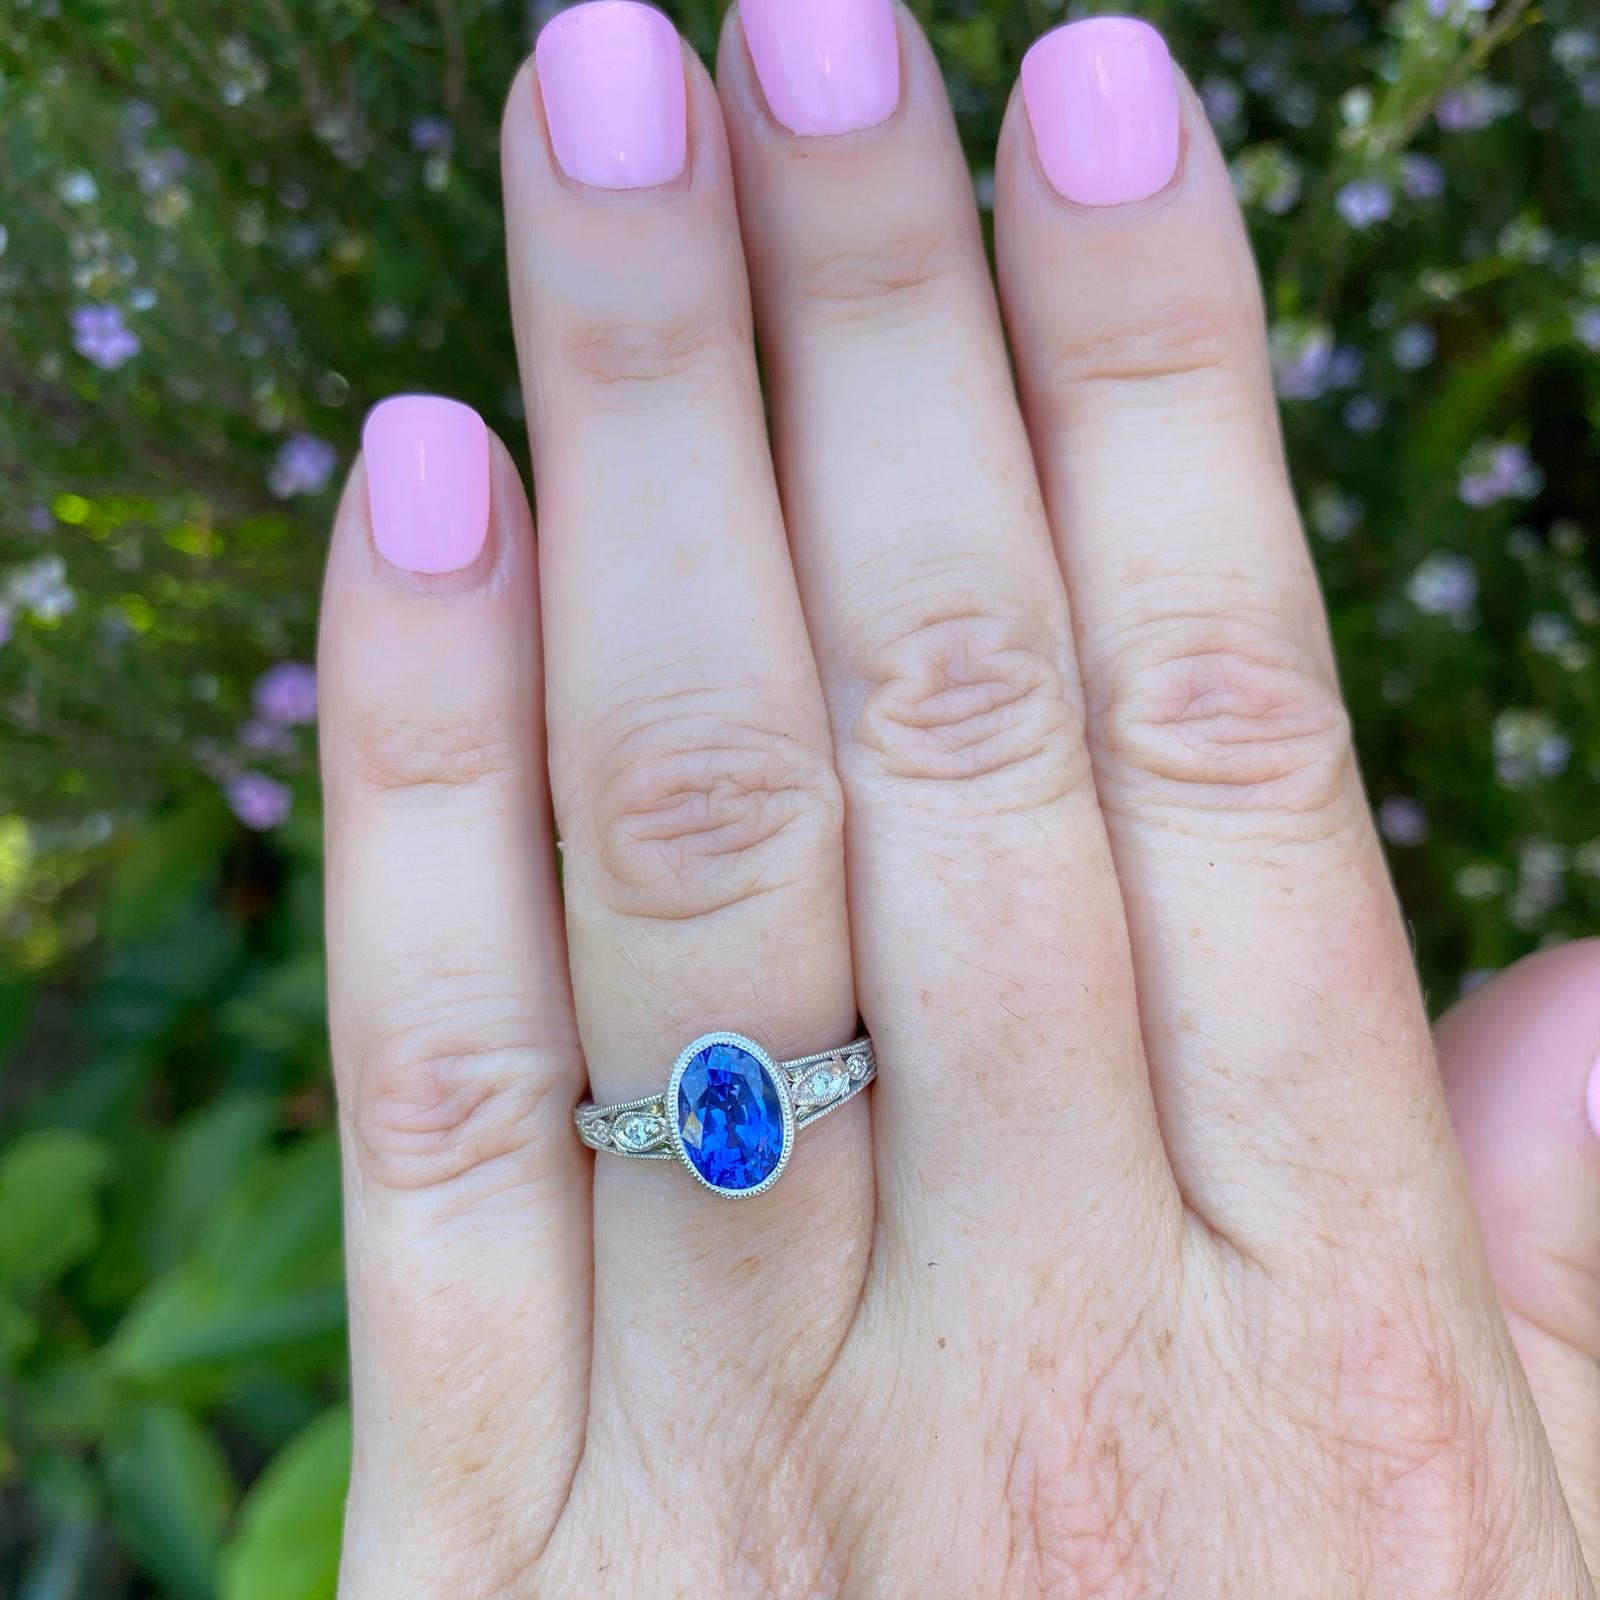 Edwardian style for contemporary taste! This platinum ring features a bezel-set 2.16-ct. oval-shaped Ceylon sapphire, vibrant and richly saturated color, accented with four bright round brilliant-cut diamond accents, weighing in total 0.04-ct.,